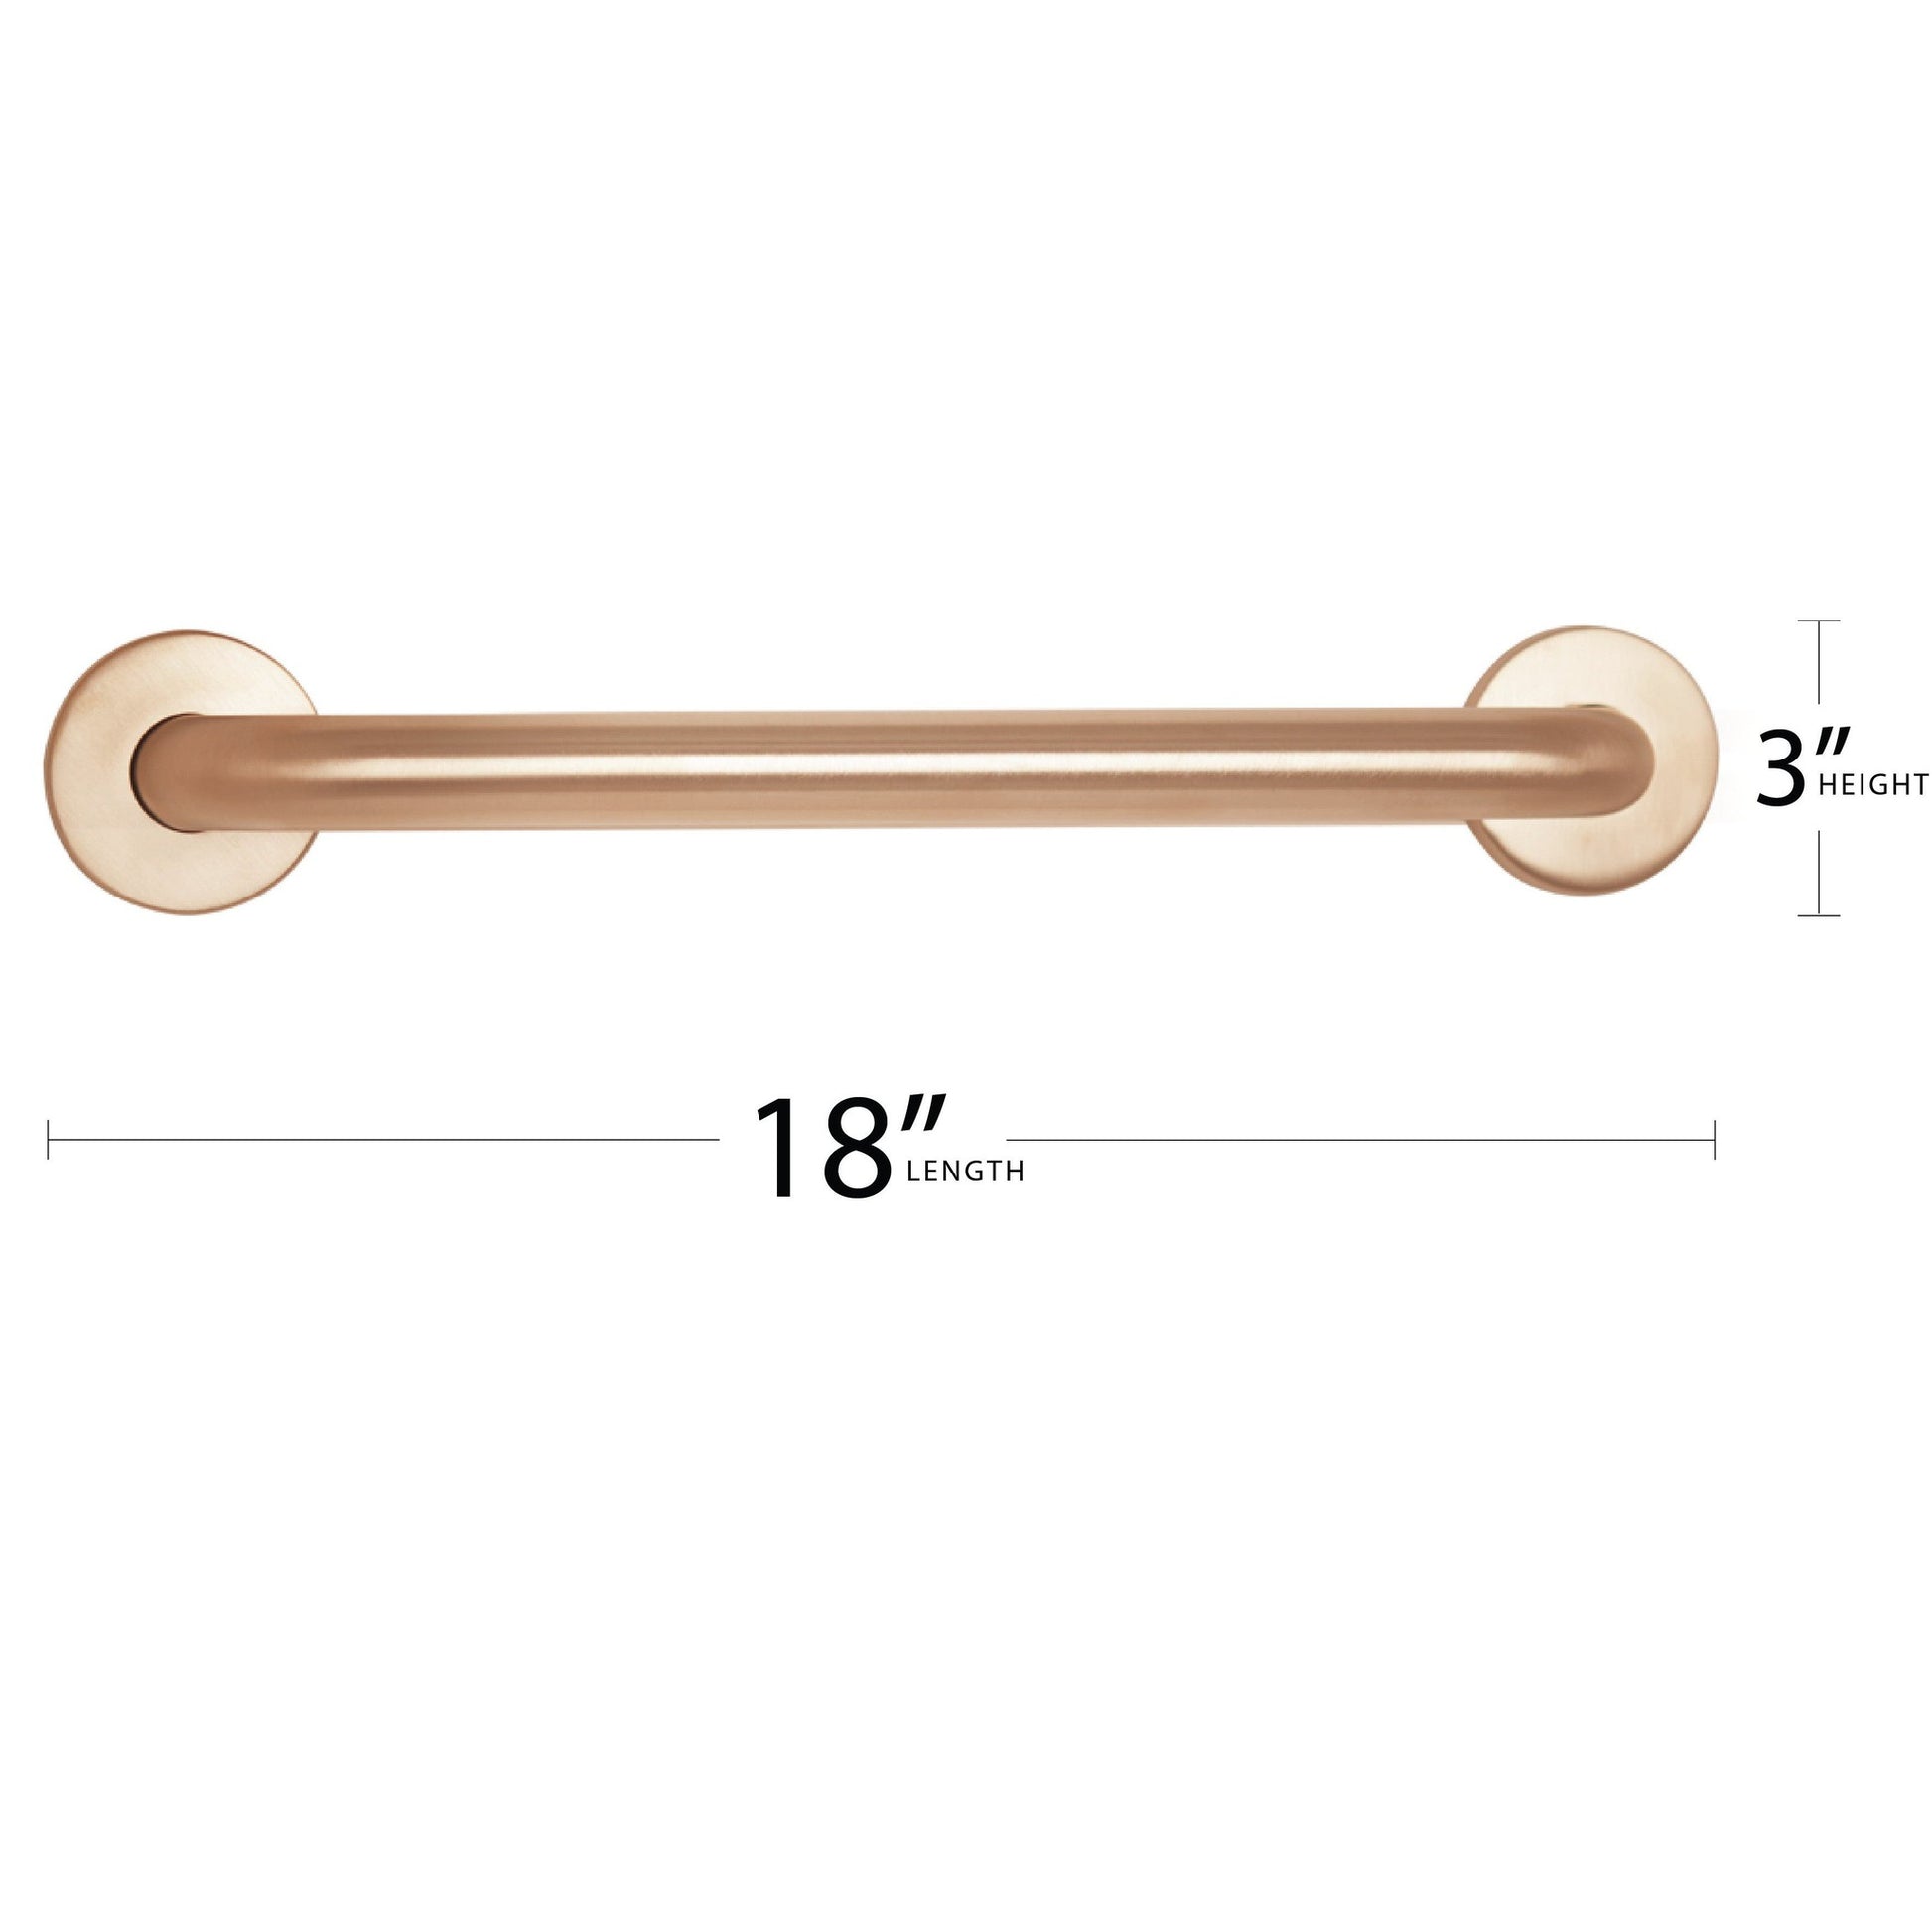 Seachrome Signature Series CuVerro 18" Antimicrobial Copper Alloy 1.5" Bar Diameter Concealed Flange Straight Grab Bar